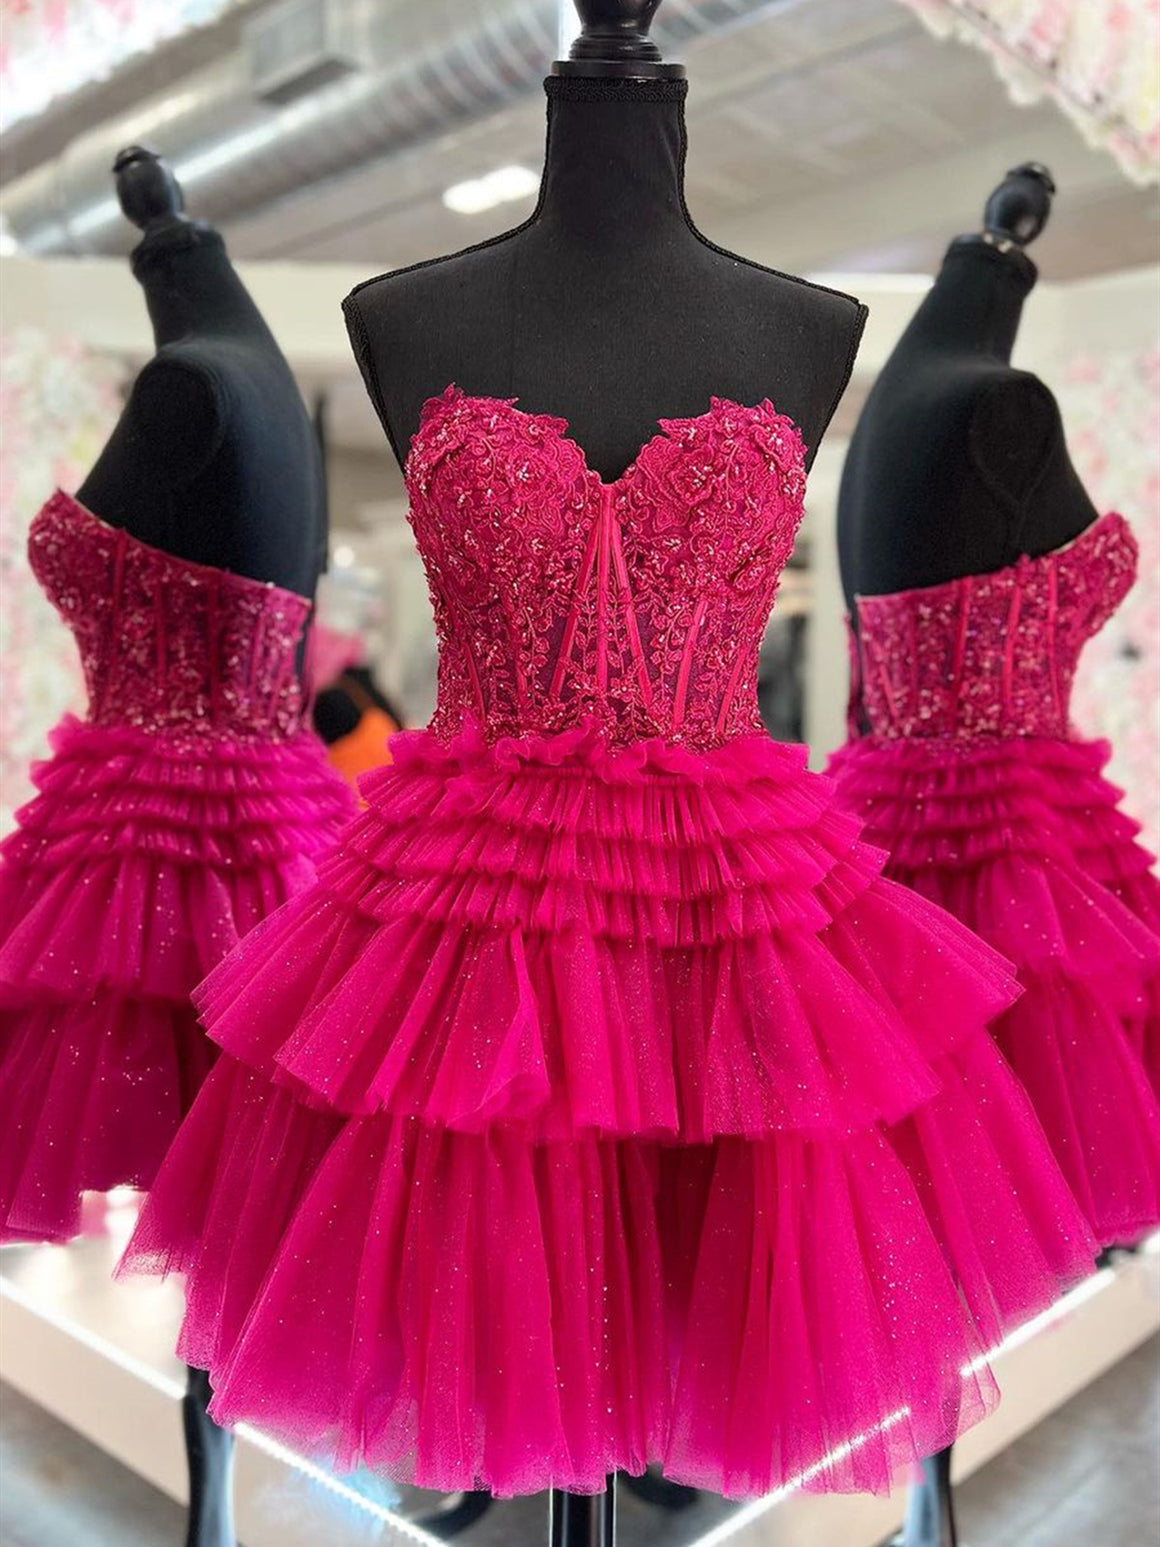 Strapless Short Fuchsia Black Pink Lace Prom Dresses, Short Lace Formal Homecoming Dresses